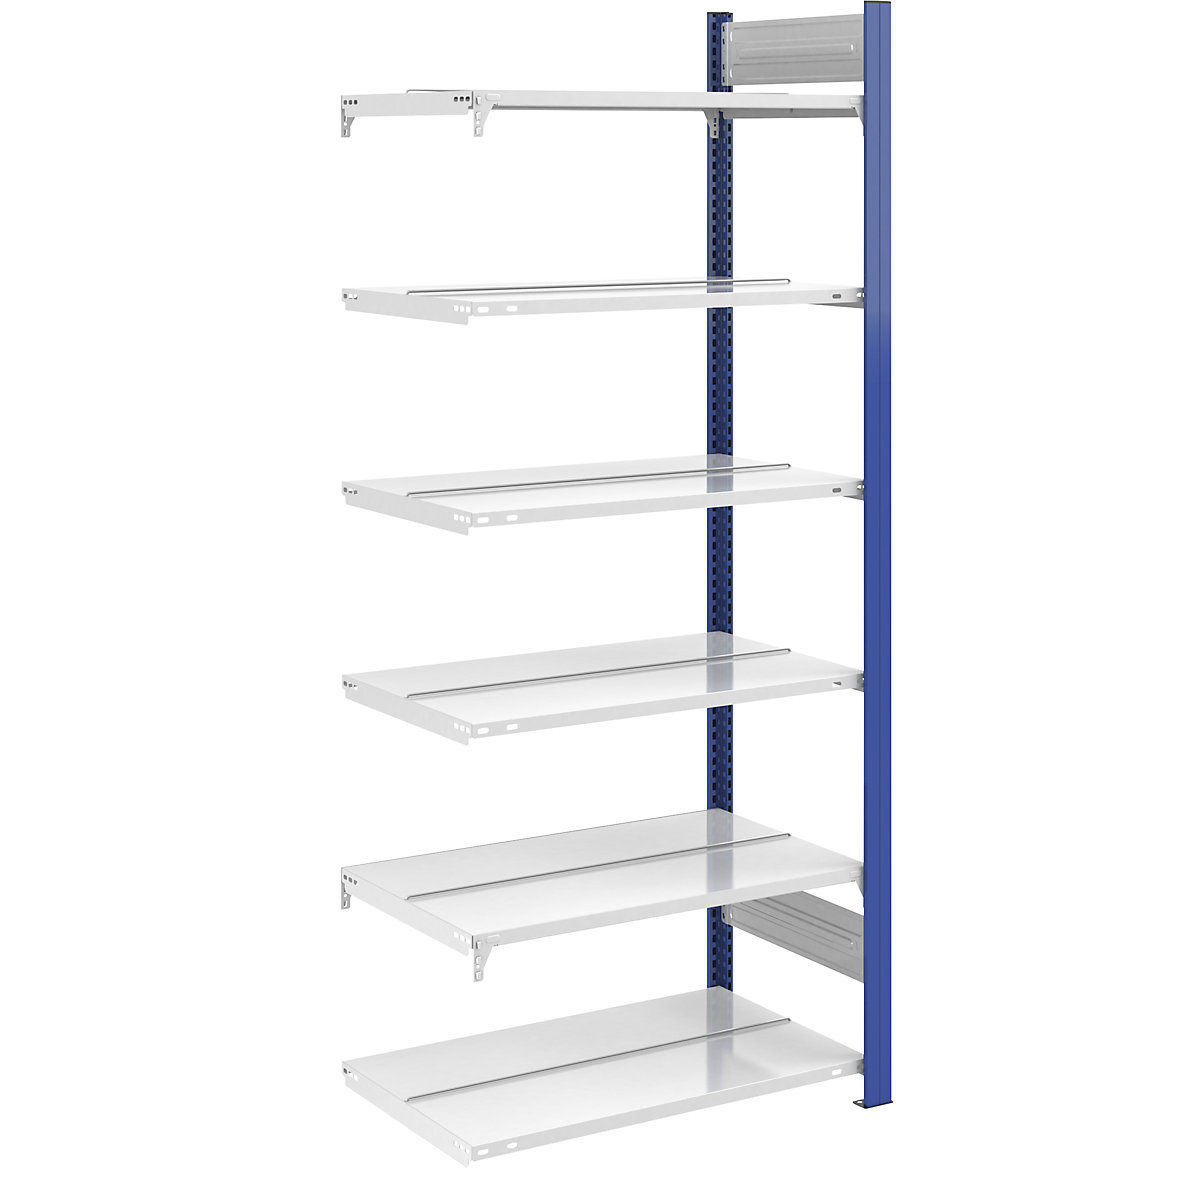 Boltless file shelving unit – hofe, double sided, height 2000 mm, WxD 750 x 600 mm, extension shelf unit, blue / grey-10